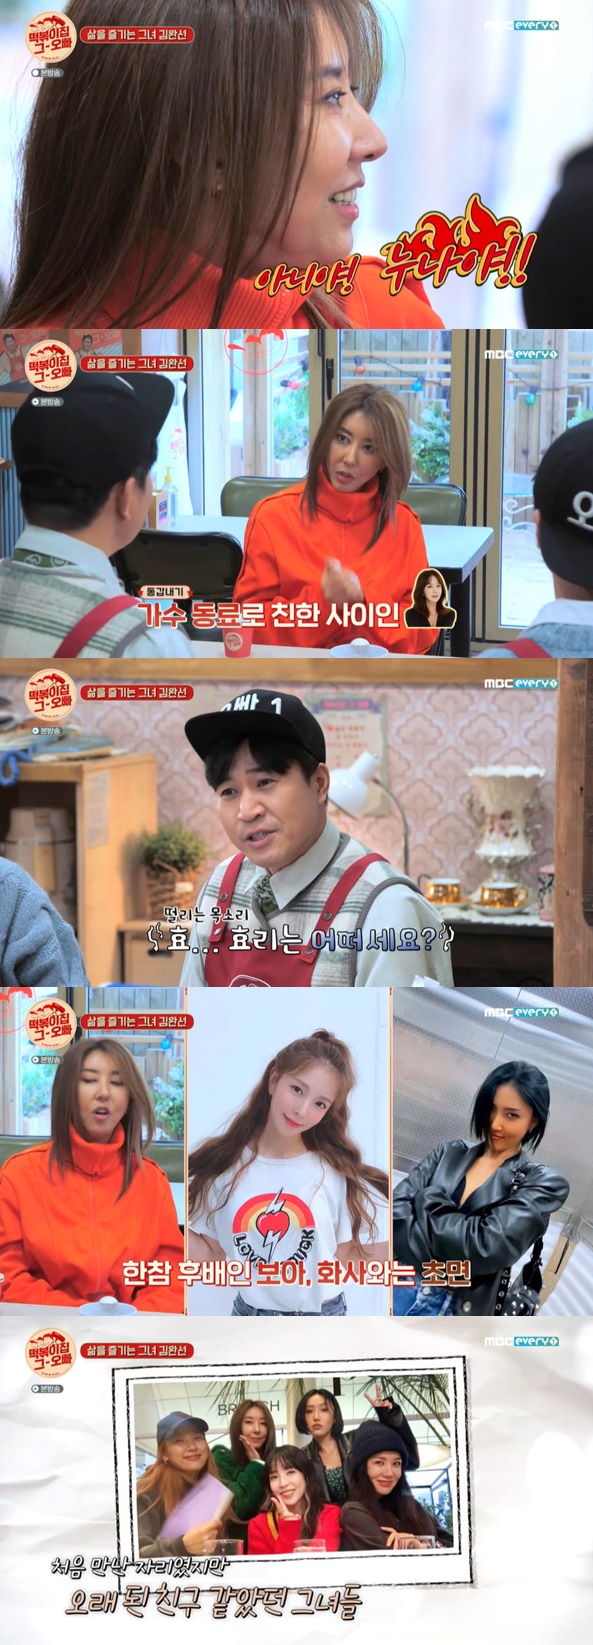 Singer Kim Wan-sun appeared as a guest on MBC Everlon entertainment program Tteokbokki house brother broadcast on the 8th.Kim Jong-min asked Kim Wan-sun about the key to maintaining youth.Kim Wan-sun laughed with candid Confessions, saying, Ignorantly, I manage it like crazy.When Kim Jong-min asked if he cares for skin, Kim Wan-sun replied, All do.Kim Jong-min then carefully asked, Did you smoke (face)? Kim Wan-sun raised his voice and laughed, saying, What are you asking so closely? I do everything. (Kim Wan-sun) is a few years older than her mother, but the title of sister is more appropriate than her mother, Lee said.Kim Wan-sun laughed, saying, I want to be called my sister and sister for a lifetime.Women dance singers have Sen Feelings, Kim Wan-sun said, there are three-looking people who are scornful.Kim Wan-sun recalled the time of appearing in the Teabing Original Entertainment program Seoul Check-in.In the program, Lee Hyori gathered topics with leisure lightning meeting with Uhm Jung-hwa, BOA and Hwasa.Kim Wan-sun said, Uhm Jung-hwa and 54-year-old are the same age, and said, Uhm Jung-hwa is not a smooth person.Kim Jong-min expressed sympathy, saying, I know well. Kim Wan-sun said of Lee Hyori, I am so good, adding that goodness drips.BOA and Hwasa were first-time at the time, he said, adding that Hwasa is babyish and polite; Mr. BOA is so pretty.I first met him but I felt like Id seen him for a long time, comfortable Feelings, Kim Wan-sun said of the leisure lightning gathering.Kim Jong-min, who shows off his friendship with Lee Hyori, said, I am not close to Hyori.Kim Jong-min said, I have known Hyori for a long time, but I have not been able to speak.Lee Chan-won said, Hyori wrote a honorific word when he spoke comfortably.Lee Yi-kyung mentioned Lee Hyori, who proposed a joint concert of female dance singers, saying, Did not you even talk about the concert?Kim Wan-sun said, I do not know if I will actually do it because I am not a producer. I hope I will hold a concert.Photo = MBC Everly One broadcast screen